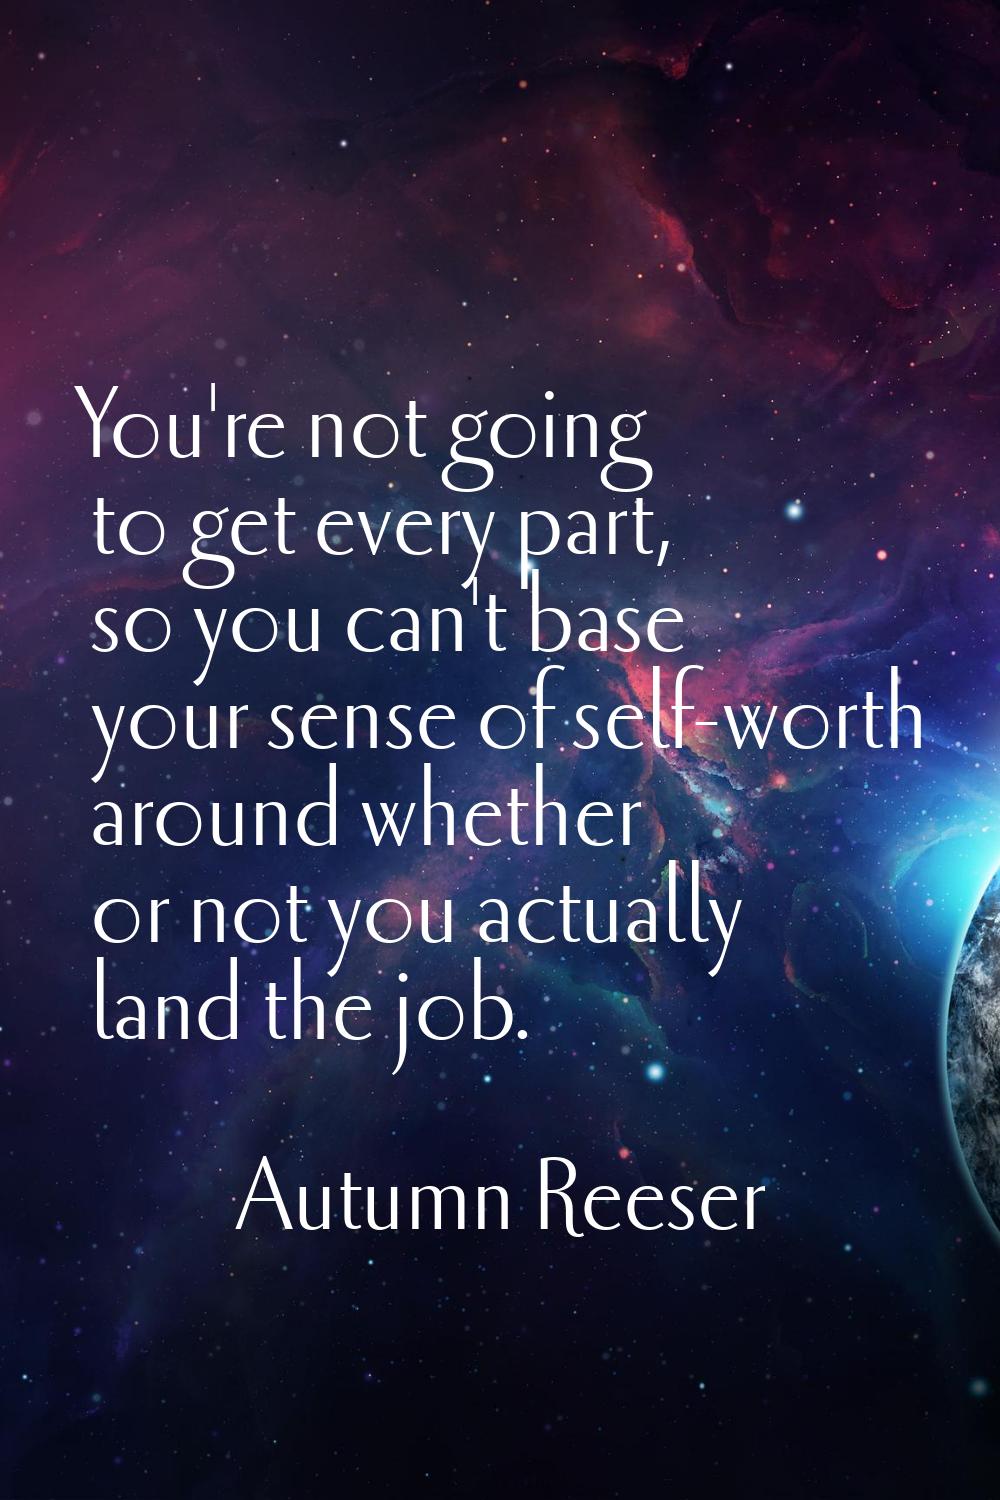 You're not going to get every part, so you can't base your sense of self-worth around whether or no